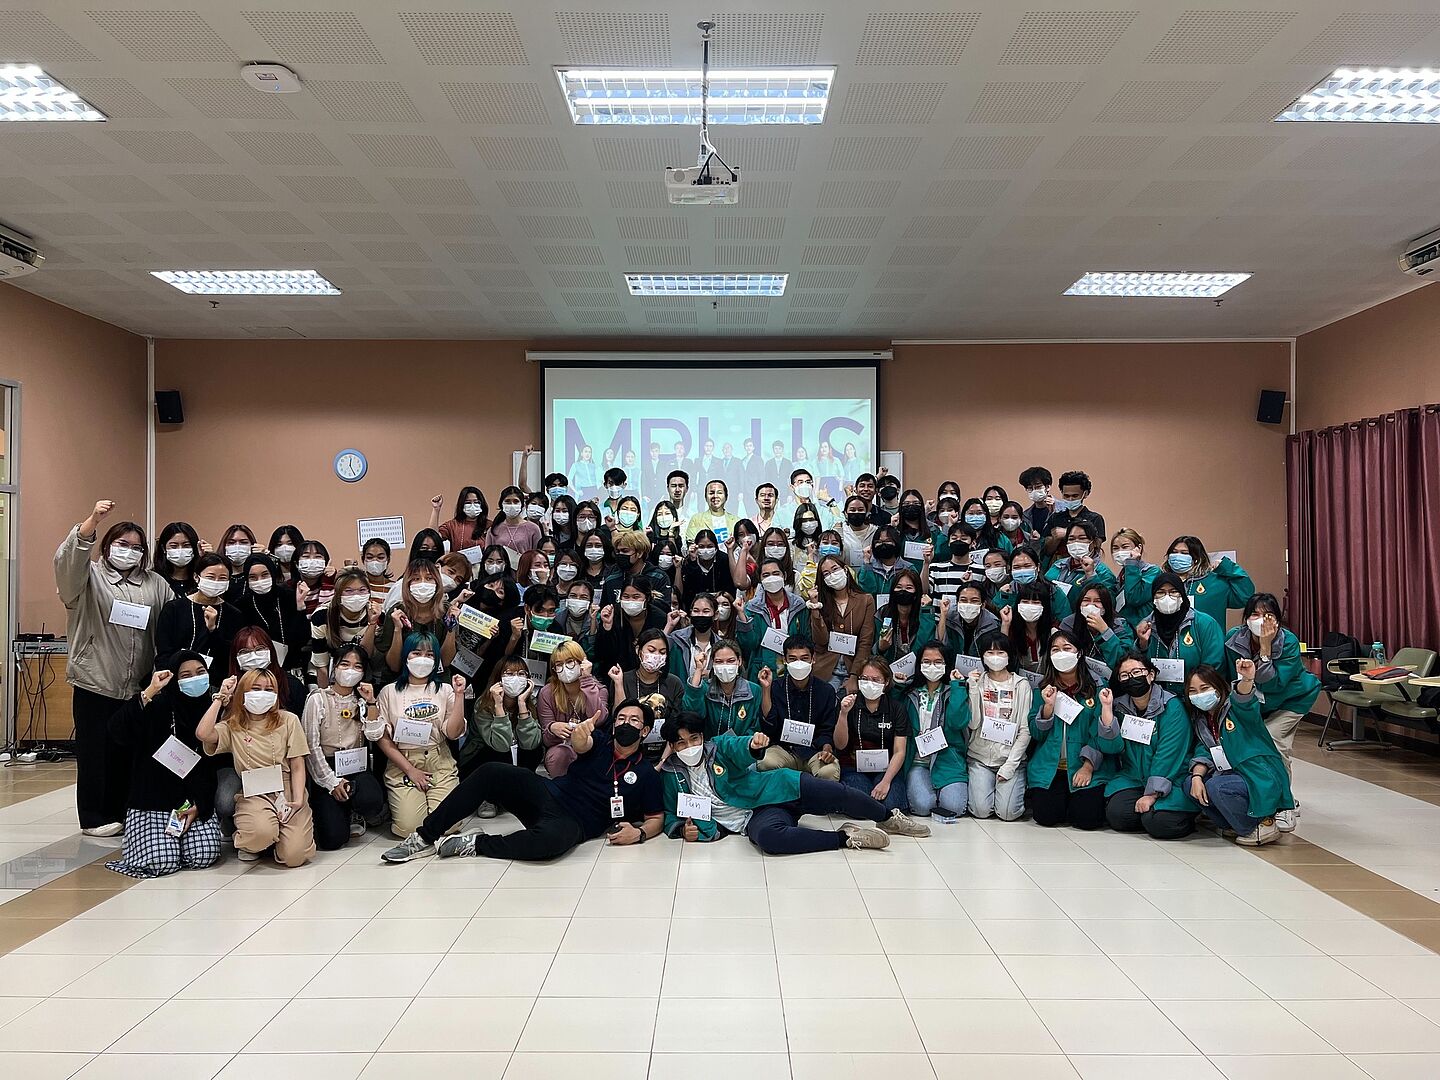 Program of Environmental Health, School of Health Sciences ,Mae Fah Luang University organized the 3Ls: Live, Learn, and Love